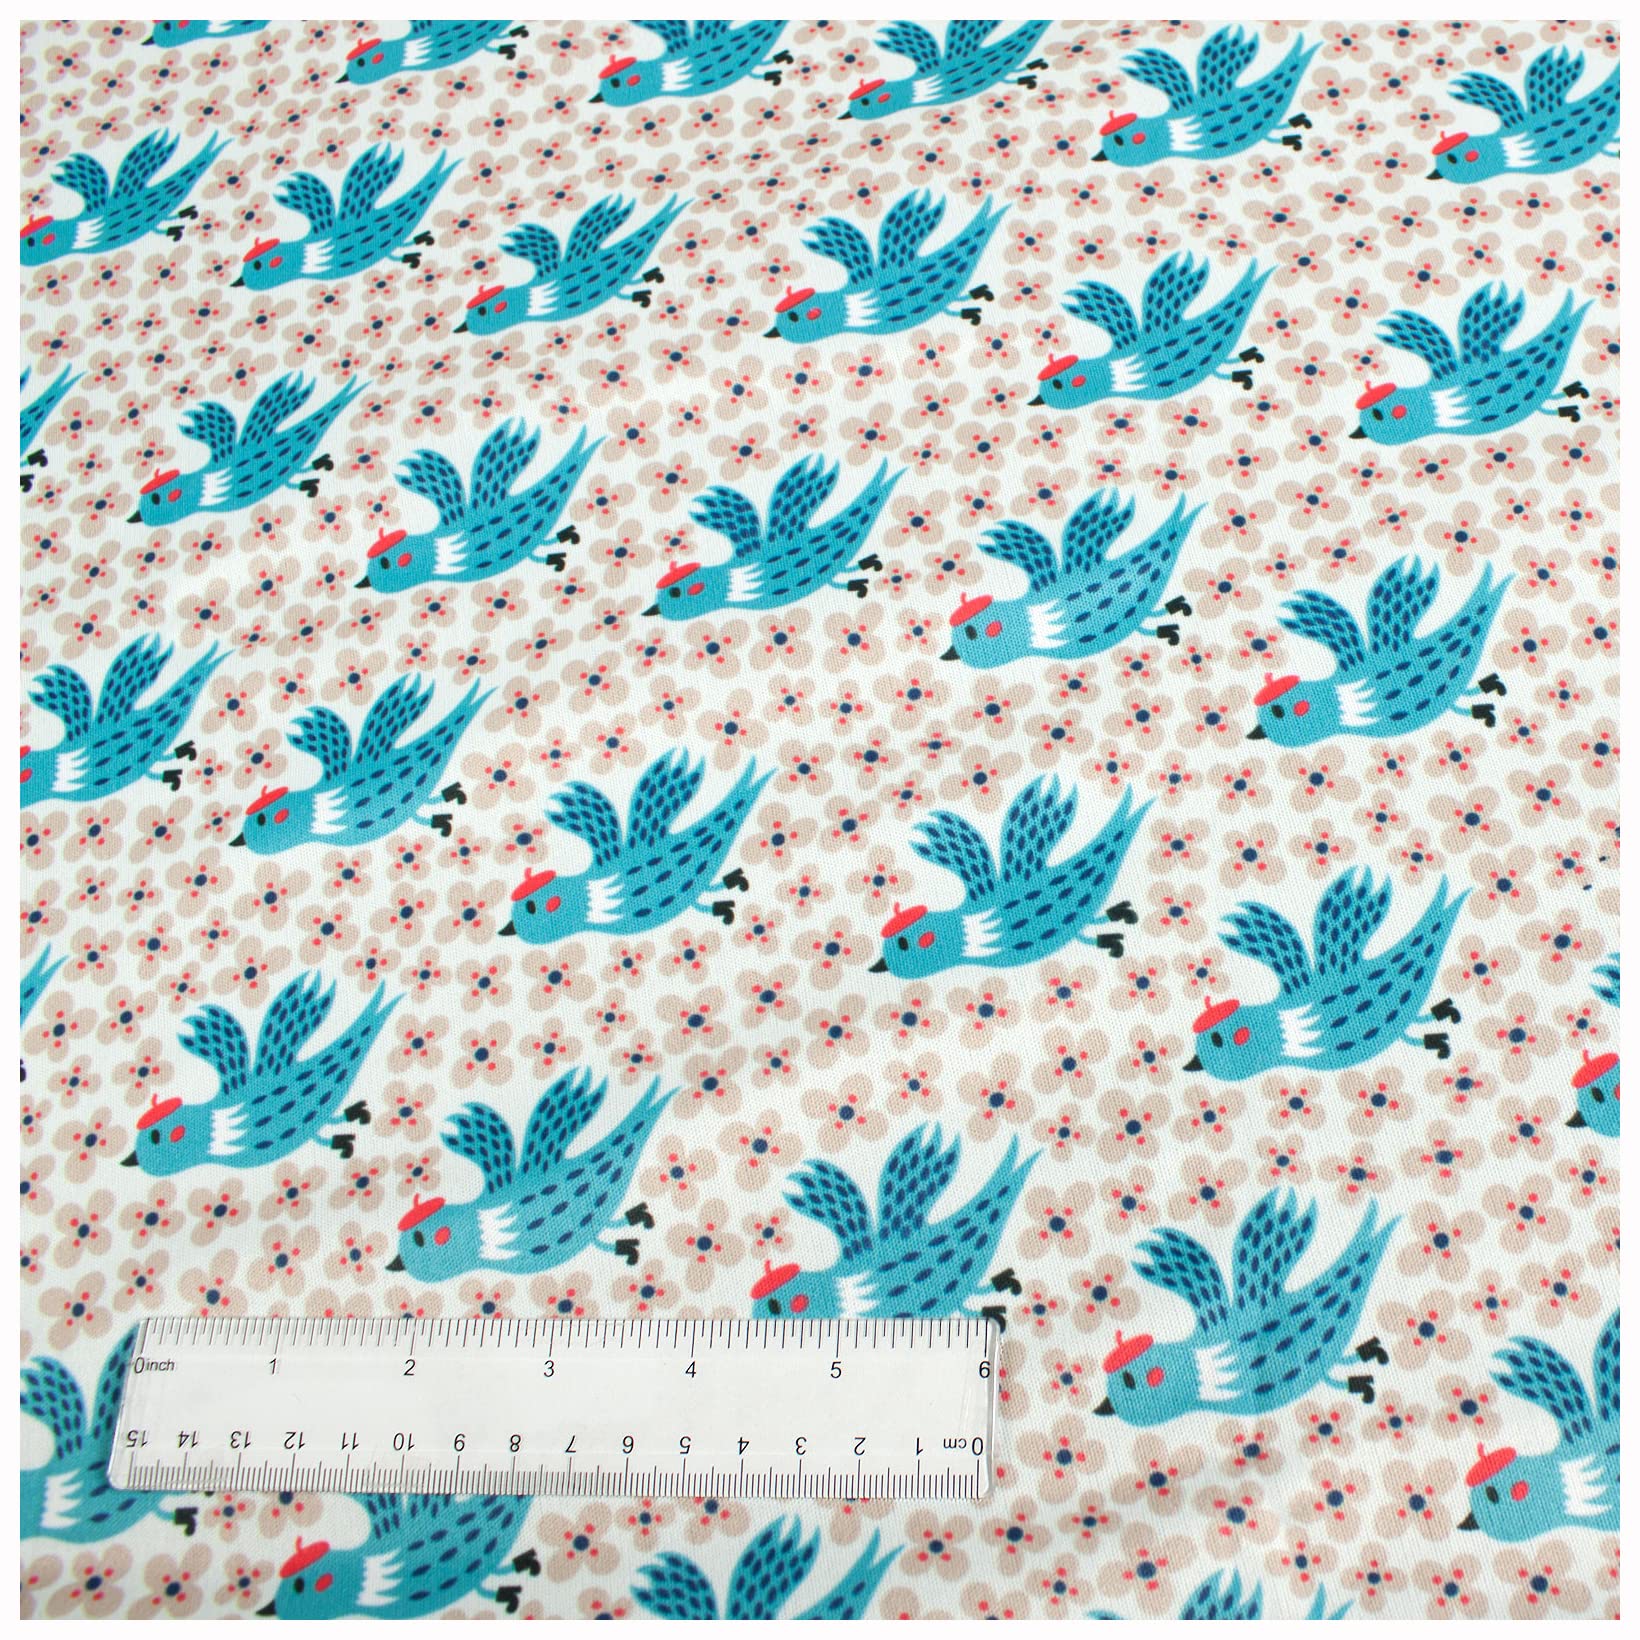 OsoCozy Polyurethane Laminate (Pul) Pre-Cut Fabric By The Meter Waterproof And Breathable Perfect For Cloth Diapers And Similar Projects